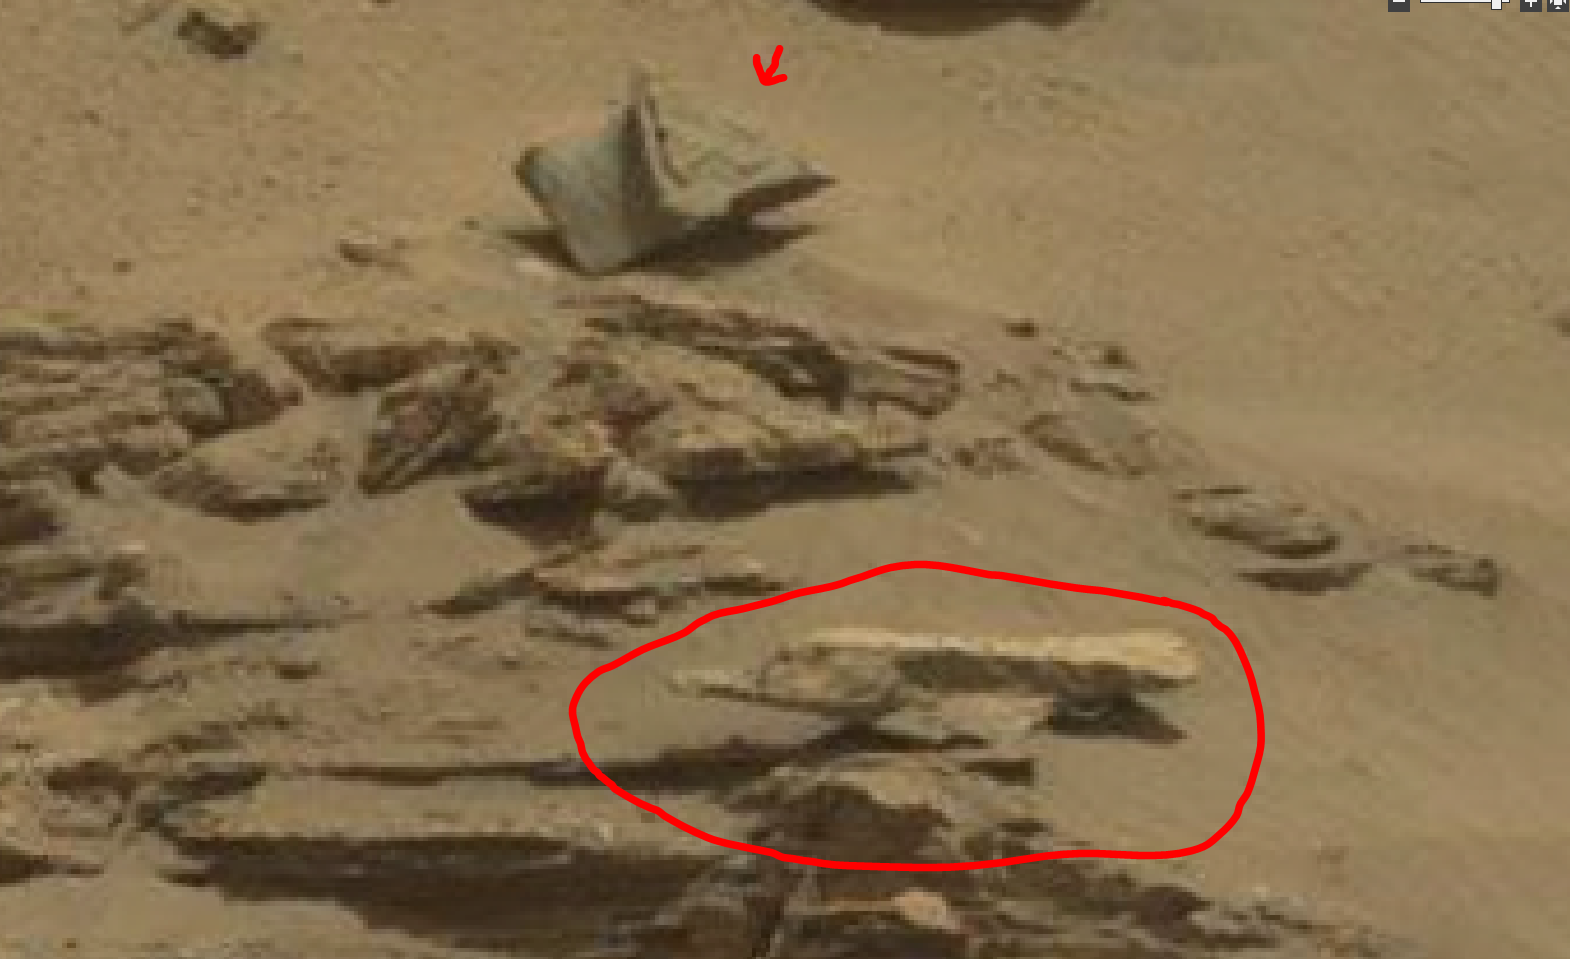 mars sol 1432 bird anomaly artifacts - was life on mars